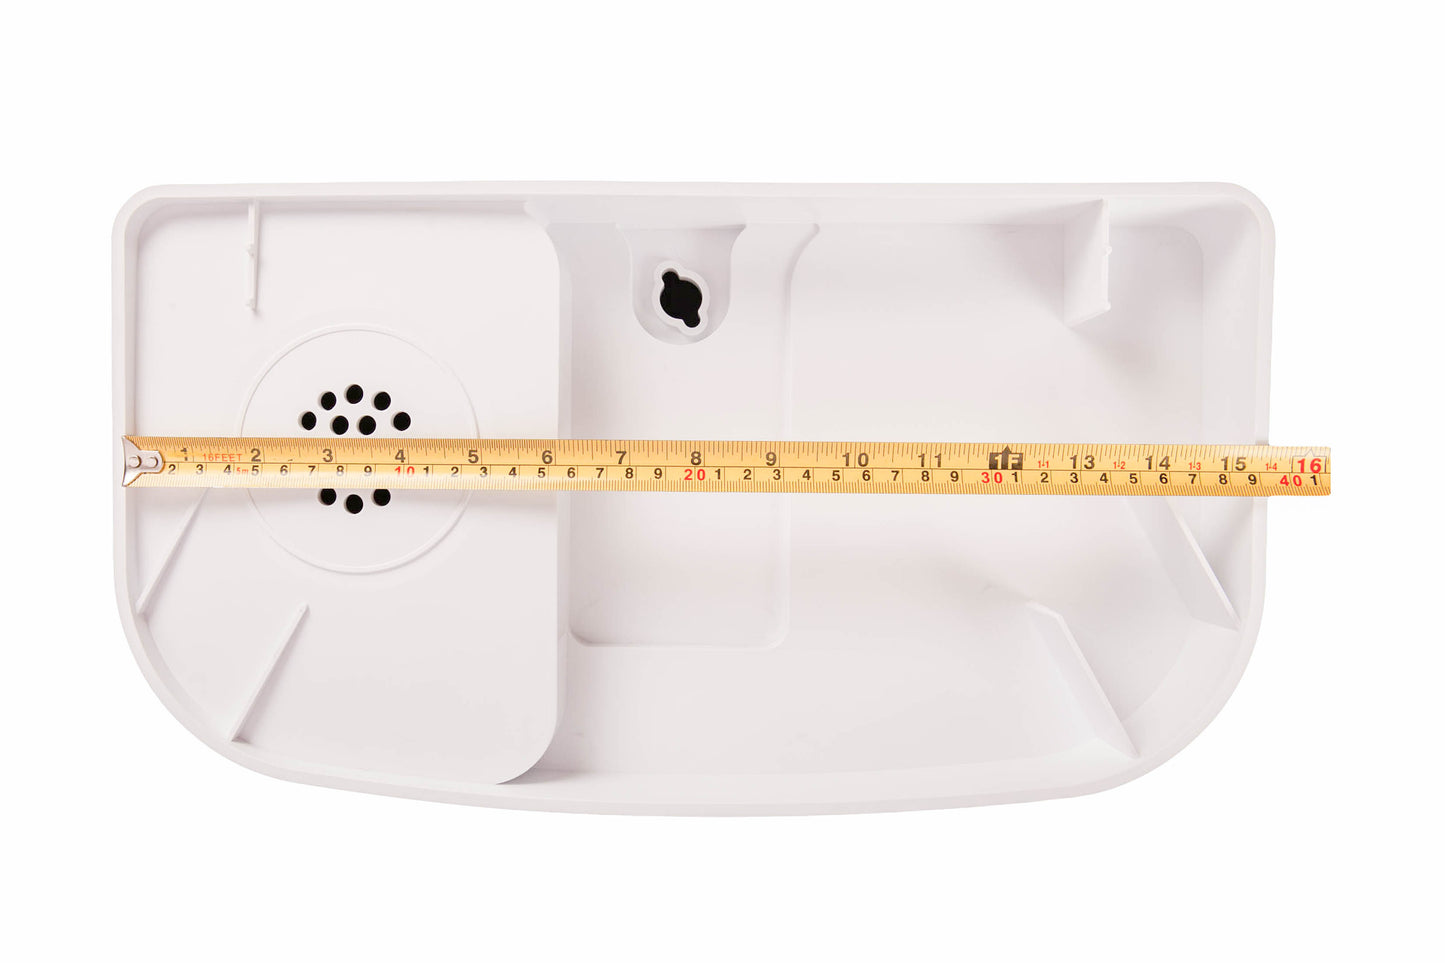 Sink Smaller toilet sink for tanks 15.25" or smaller measured with lid off (by SinkTwice)